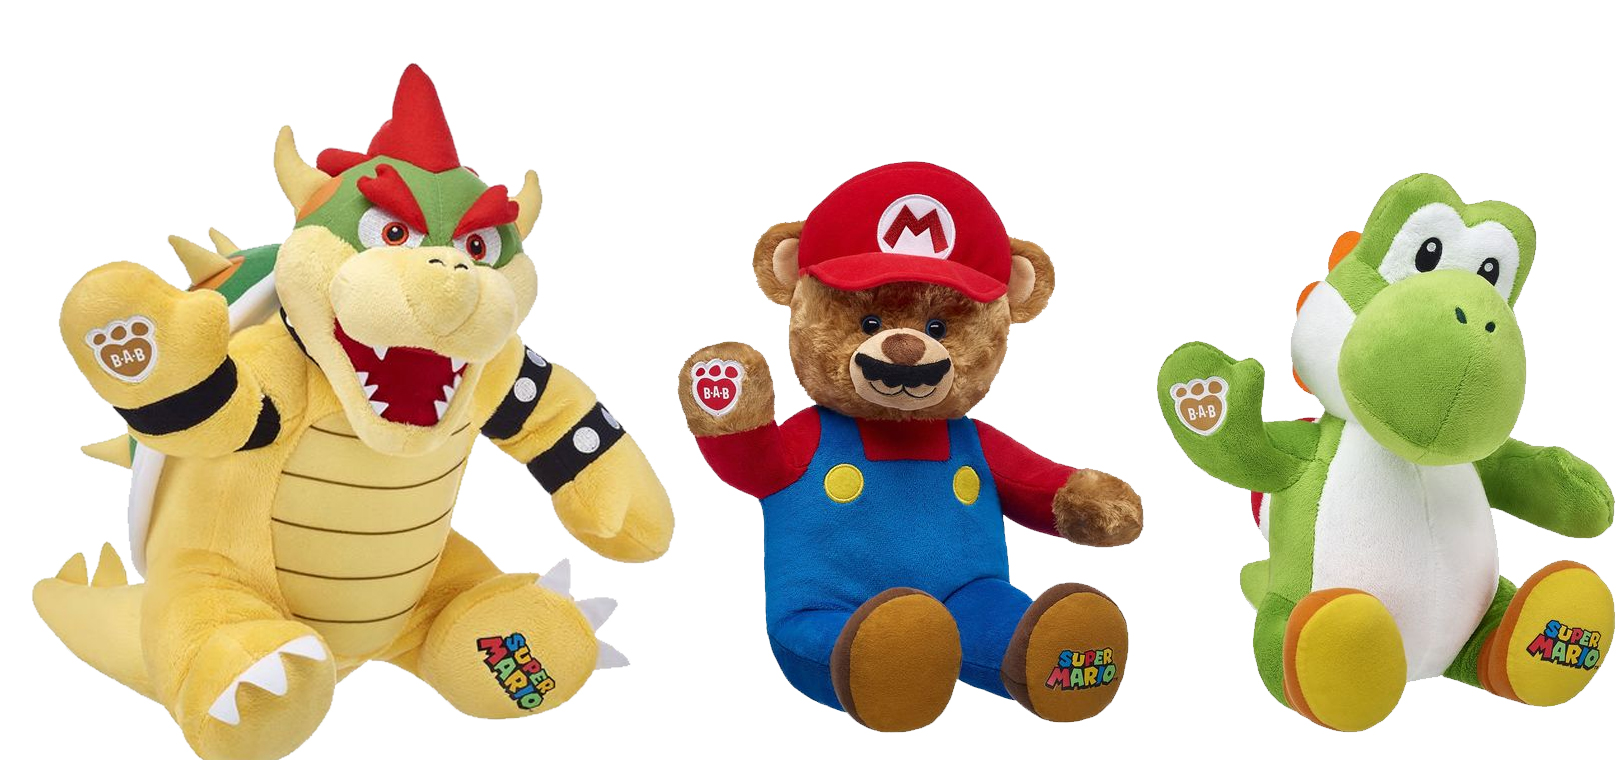 Mario And Bowser Get Along Much Better As Build-A-Bears